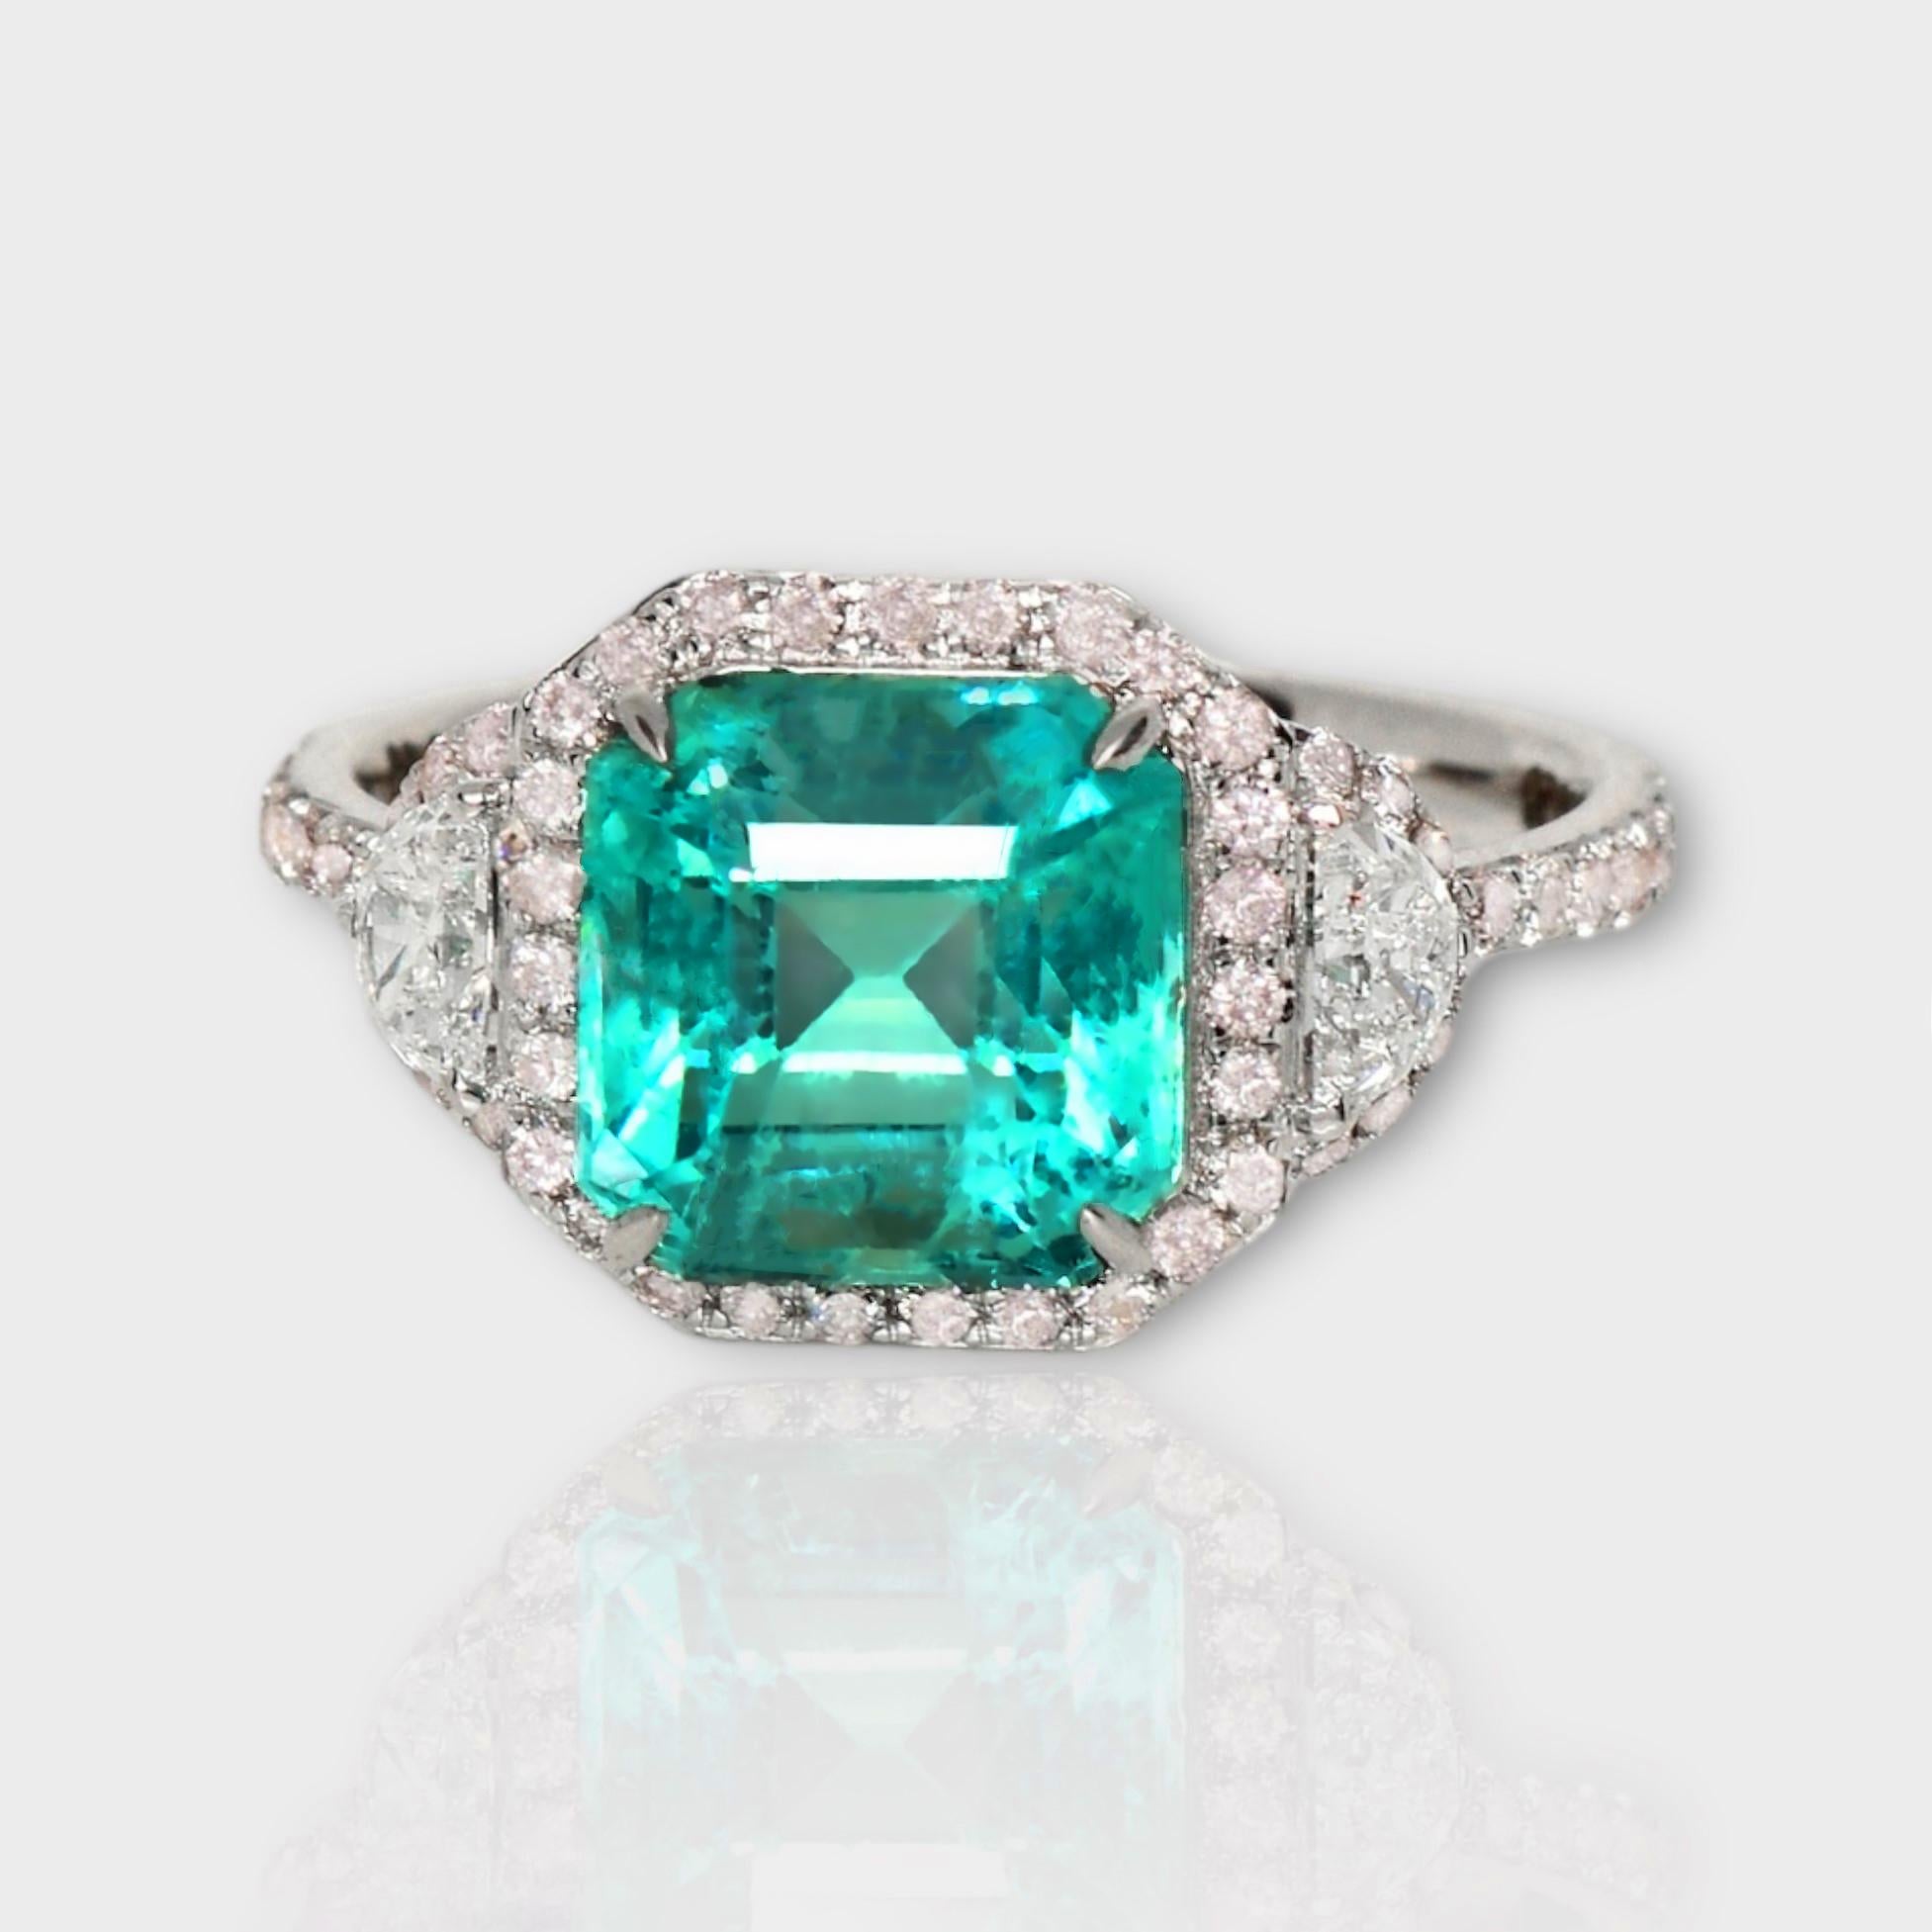 *IGI 18k 3.10 ct Natural Emerald&Pink Diamond Antique Art Deco Engagement Ring*

An IGI-certified natural bluish-green emerald with great color and fire luster, weighing 3.10 ct, is set on an 18K white gold pave band with natural pink diamonds